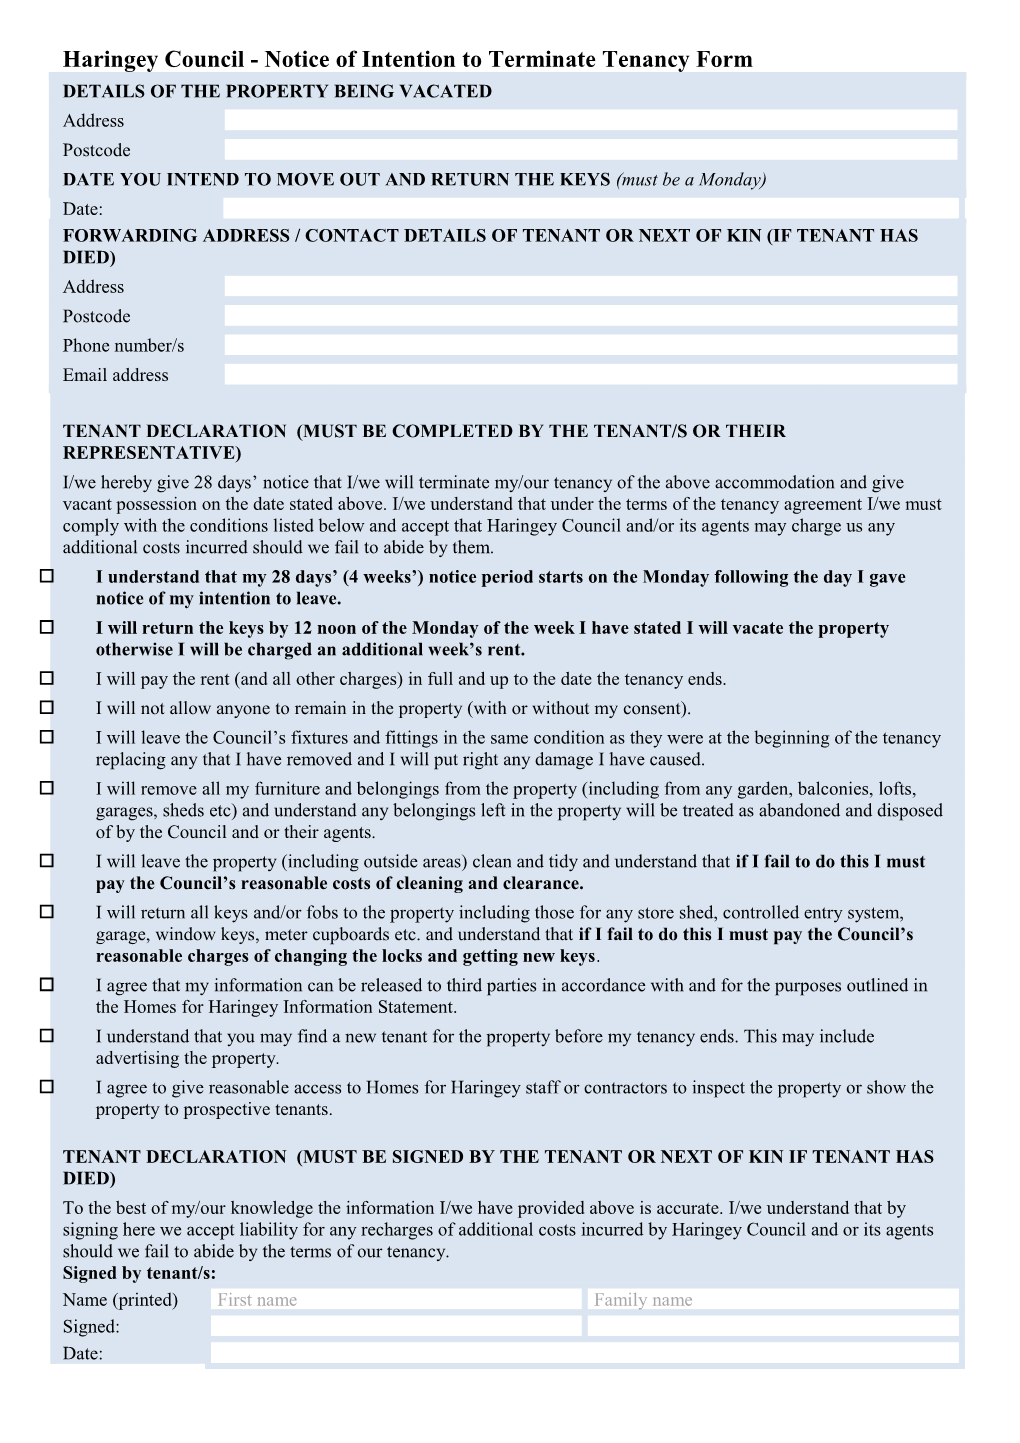 Haringey Council - Notice of Intention to Terminate Tenancy Form